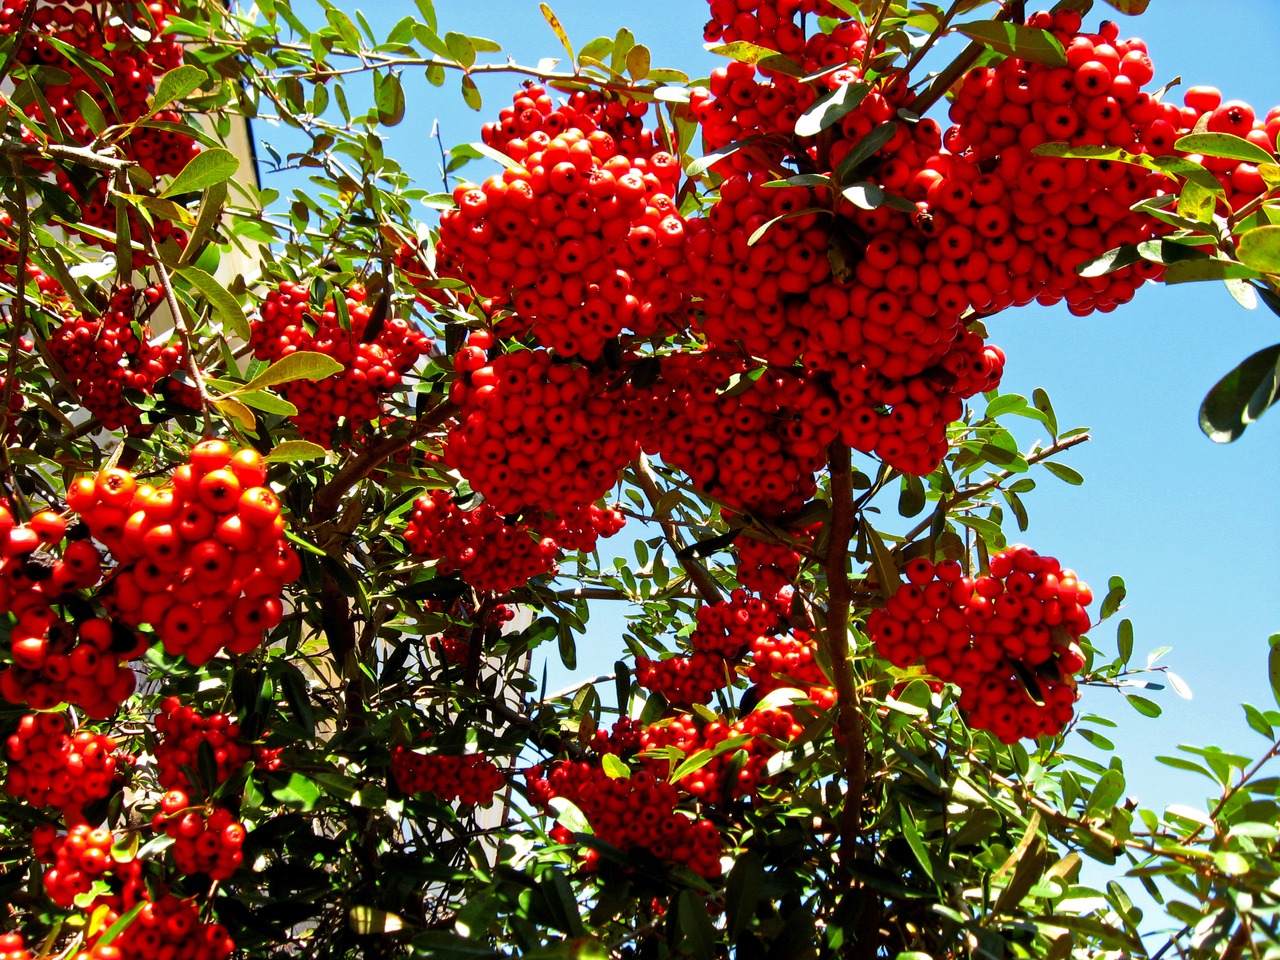 Red/orange berries on a narrowleaf firethorn (Pyracantha angustifolia) shrub outside the east wing (1914) of the main house at Pebble Hill Plantation.